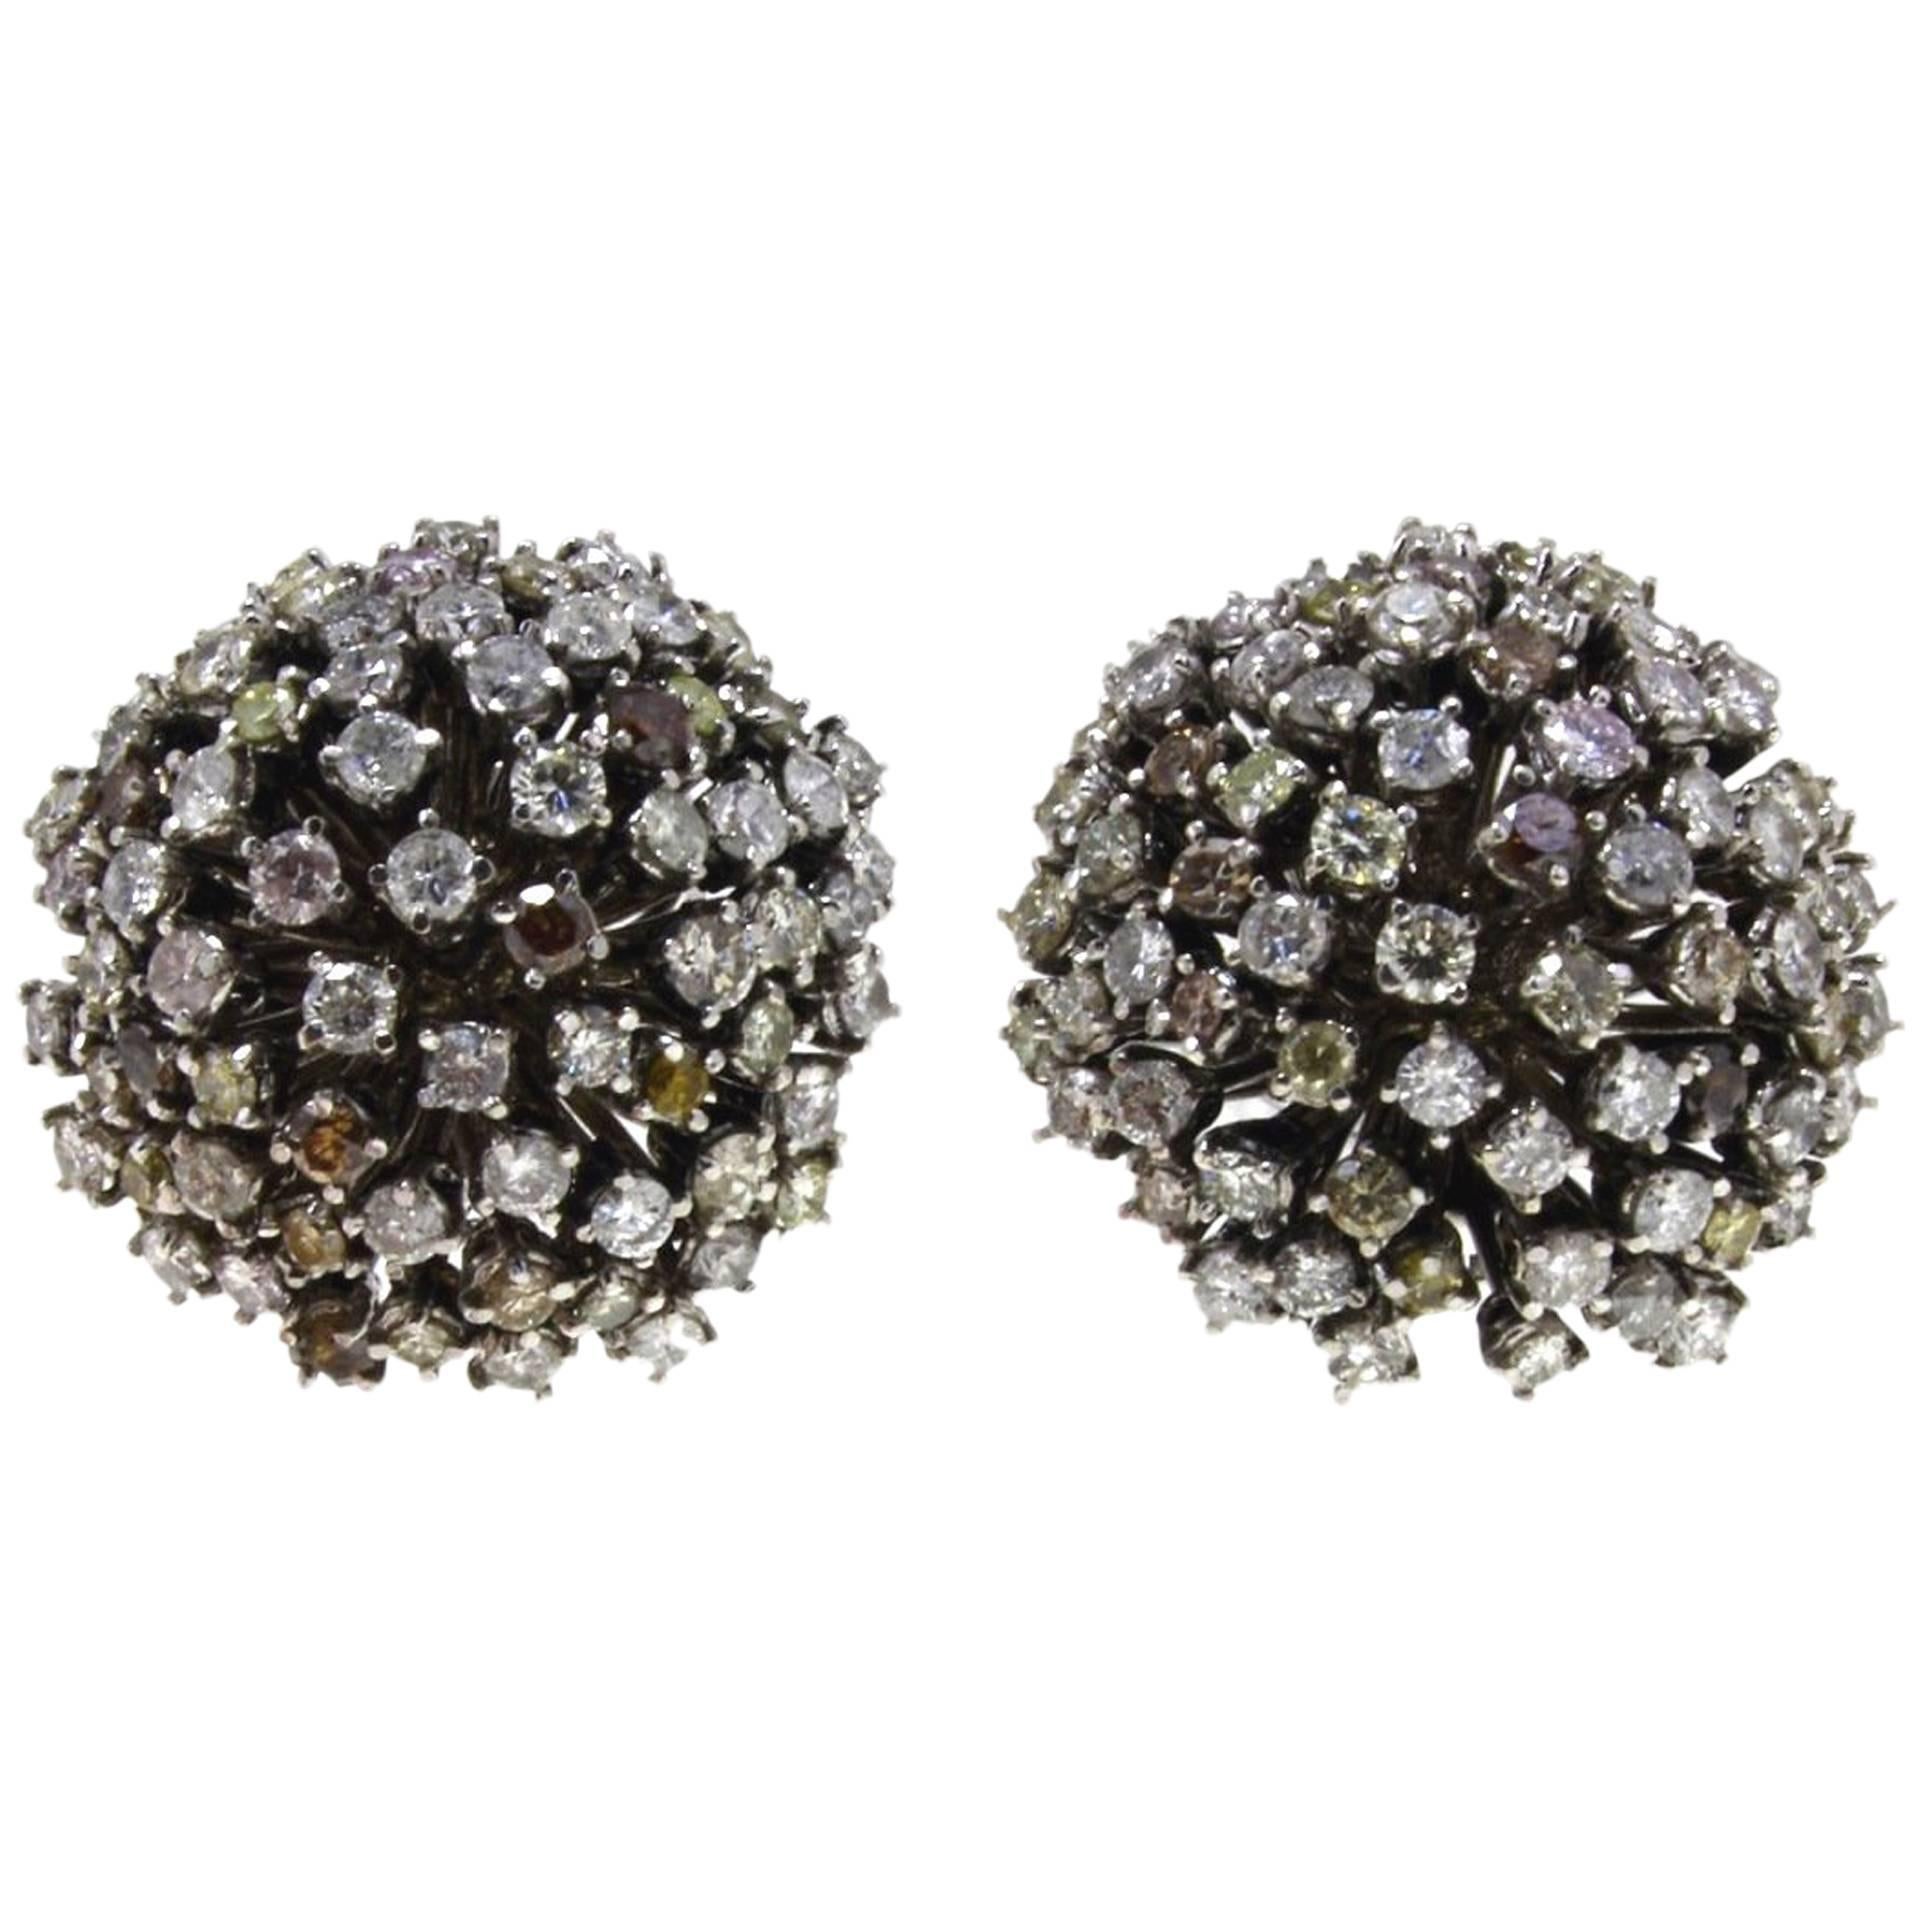 Fancy Colored and White Diamonds, White Gold Stud Earrings